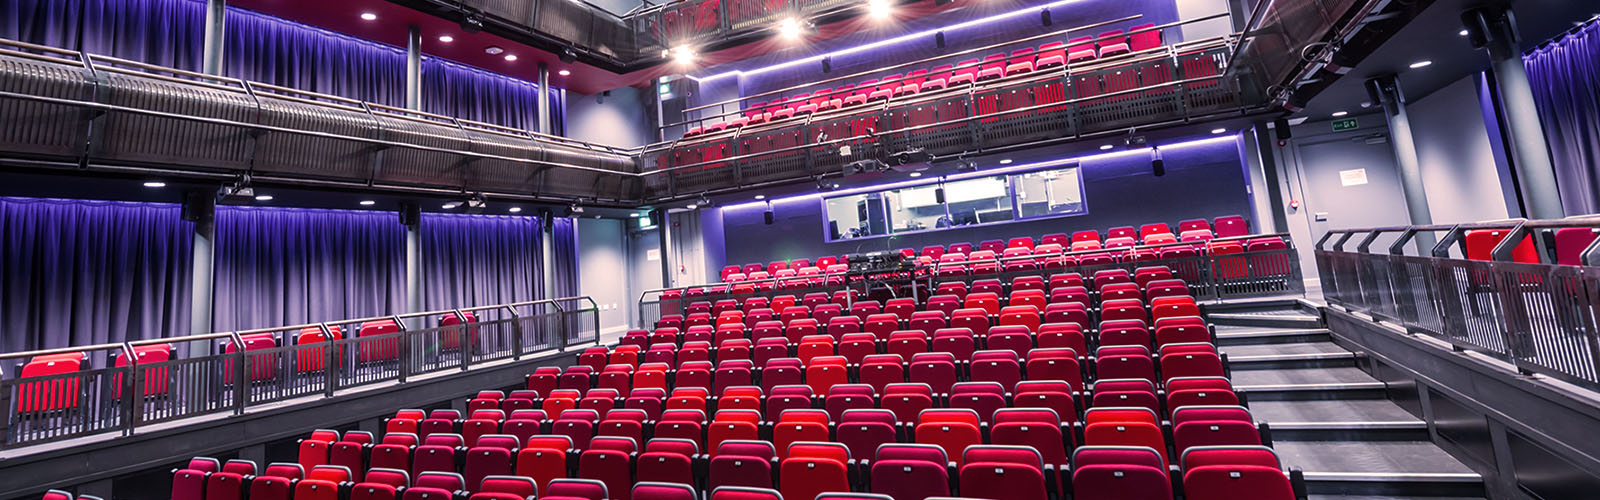 A photo of the inside of the University of Salford's Theatre.